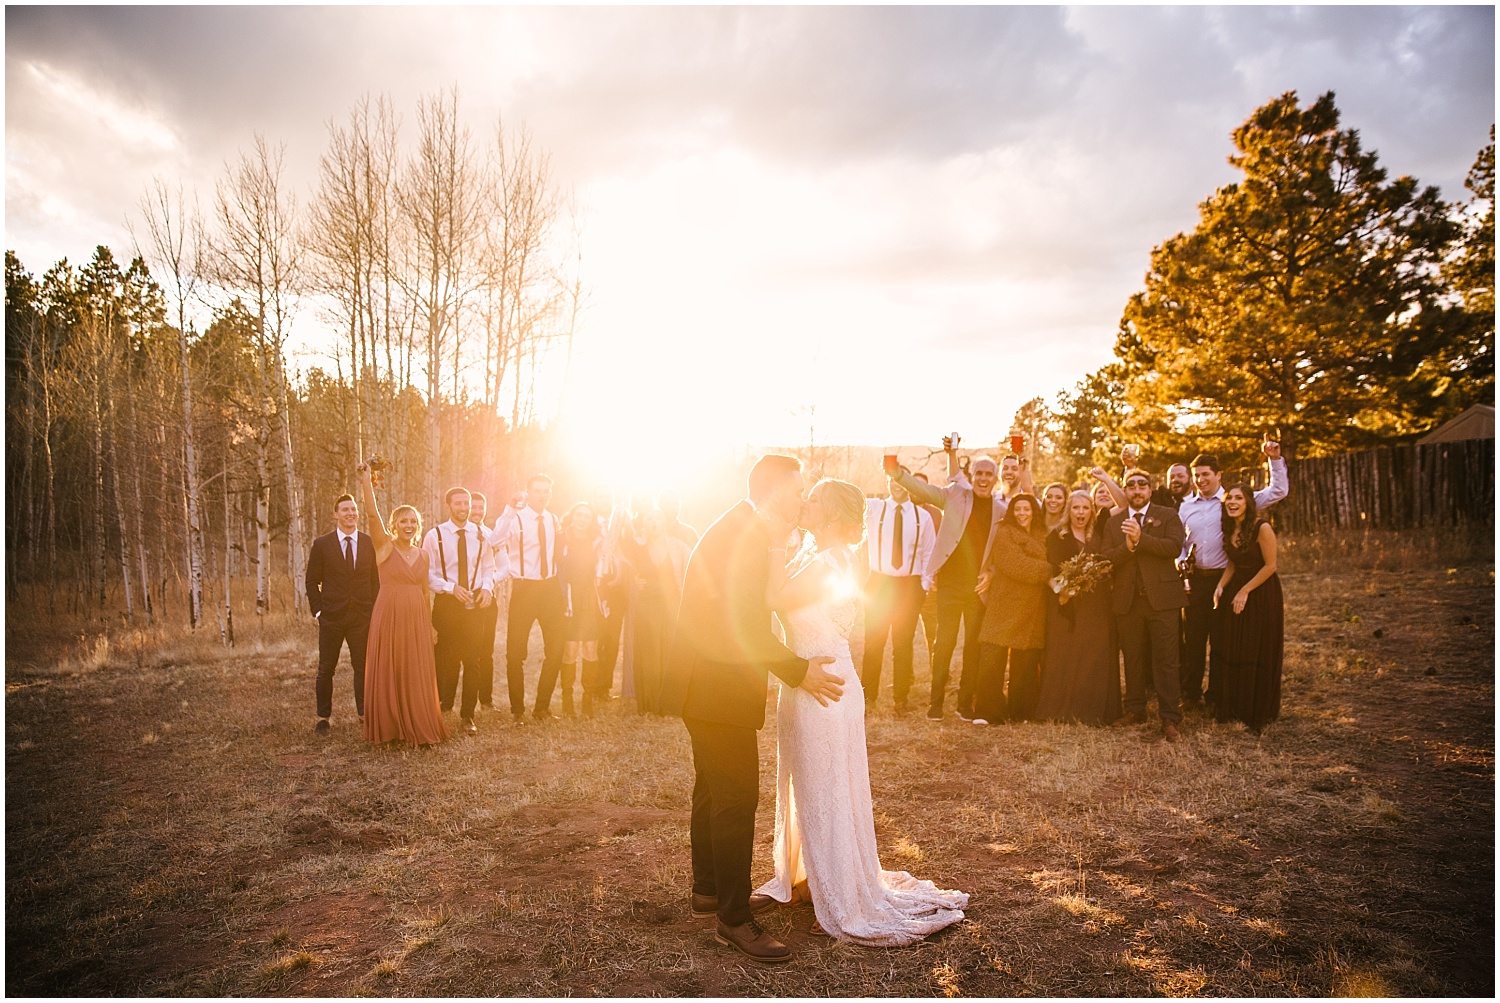 Bride and groom's first dance in a field at golden hour at intimate wedding in Woodland Park